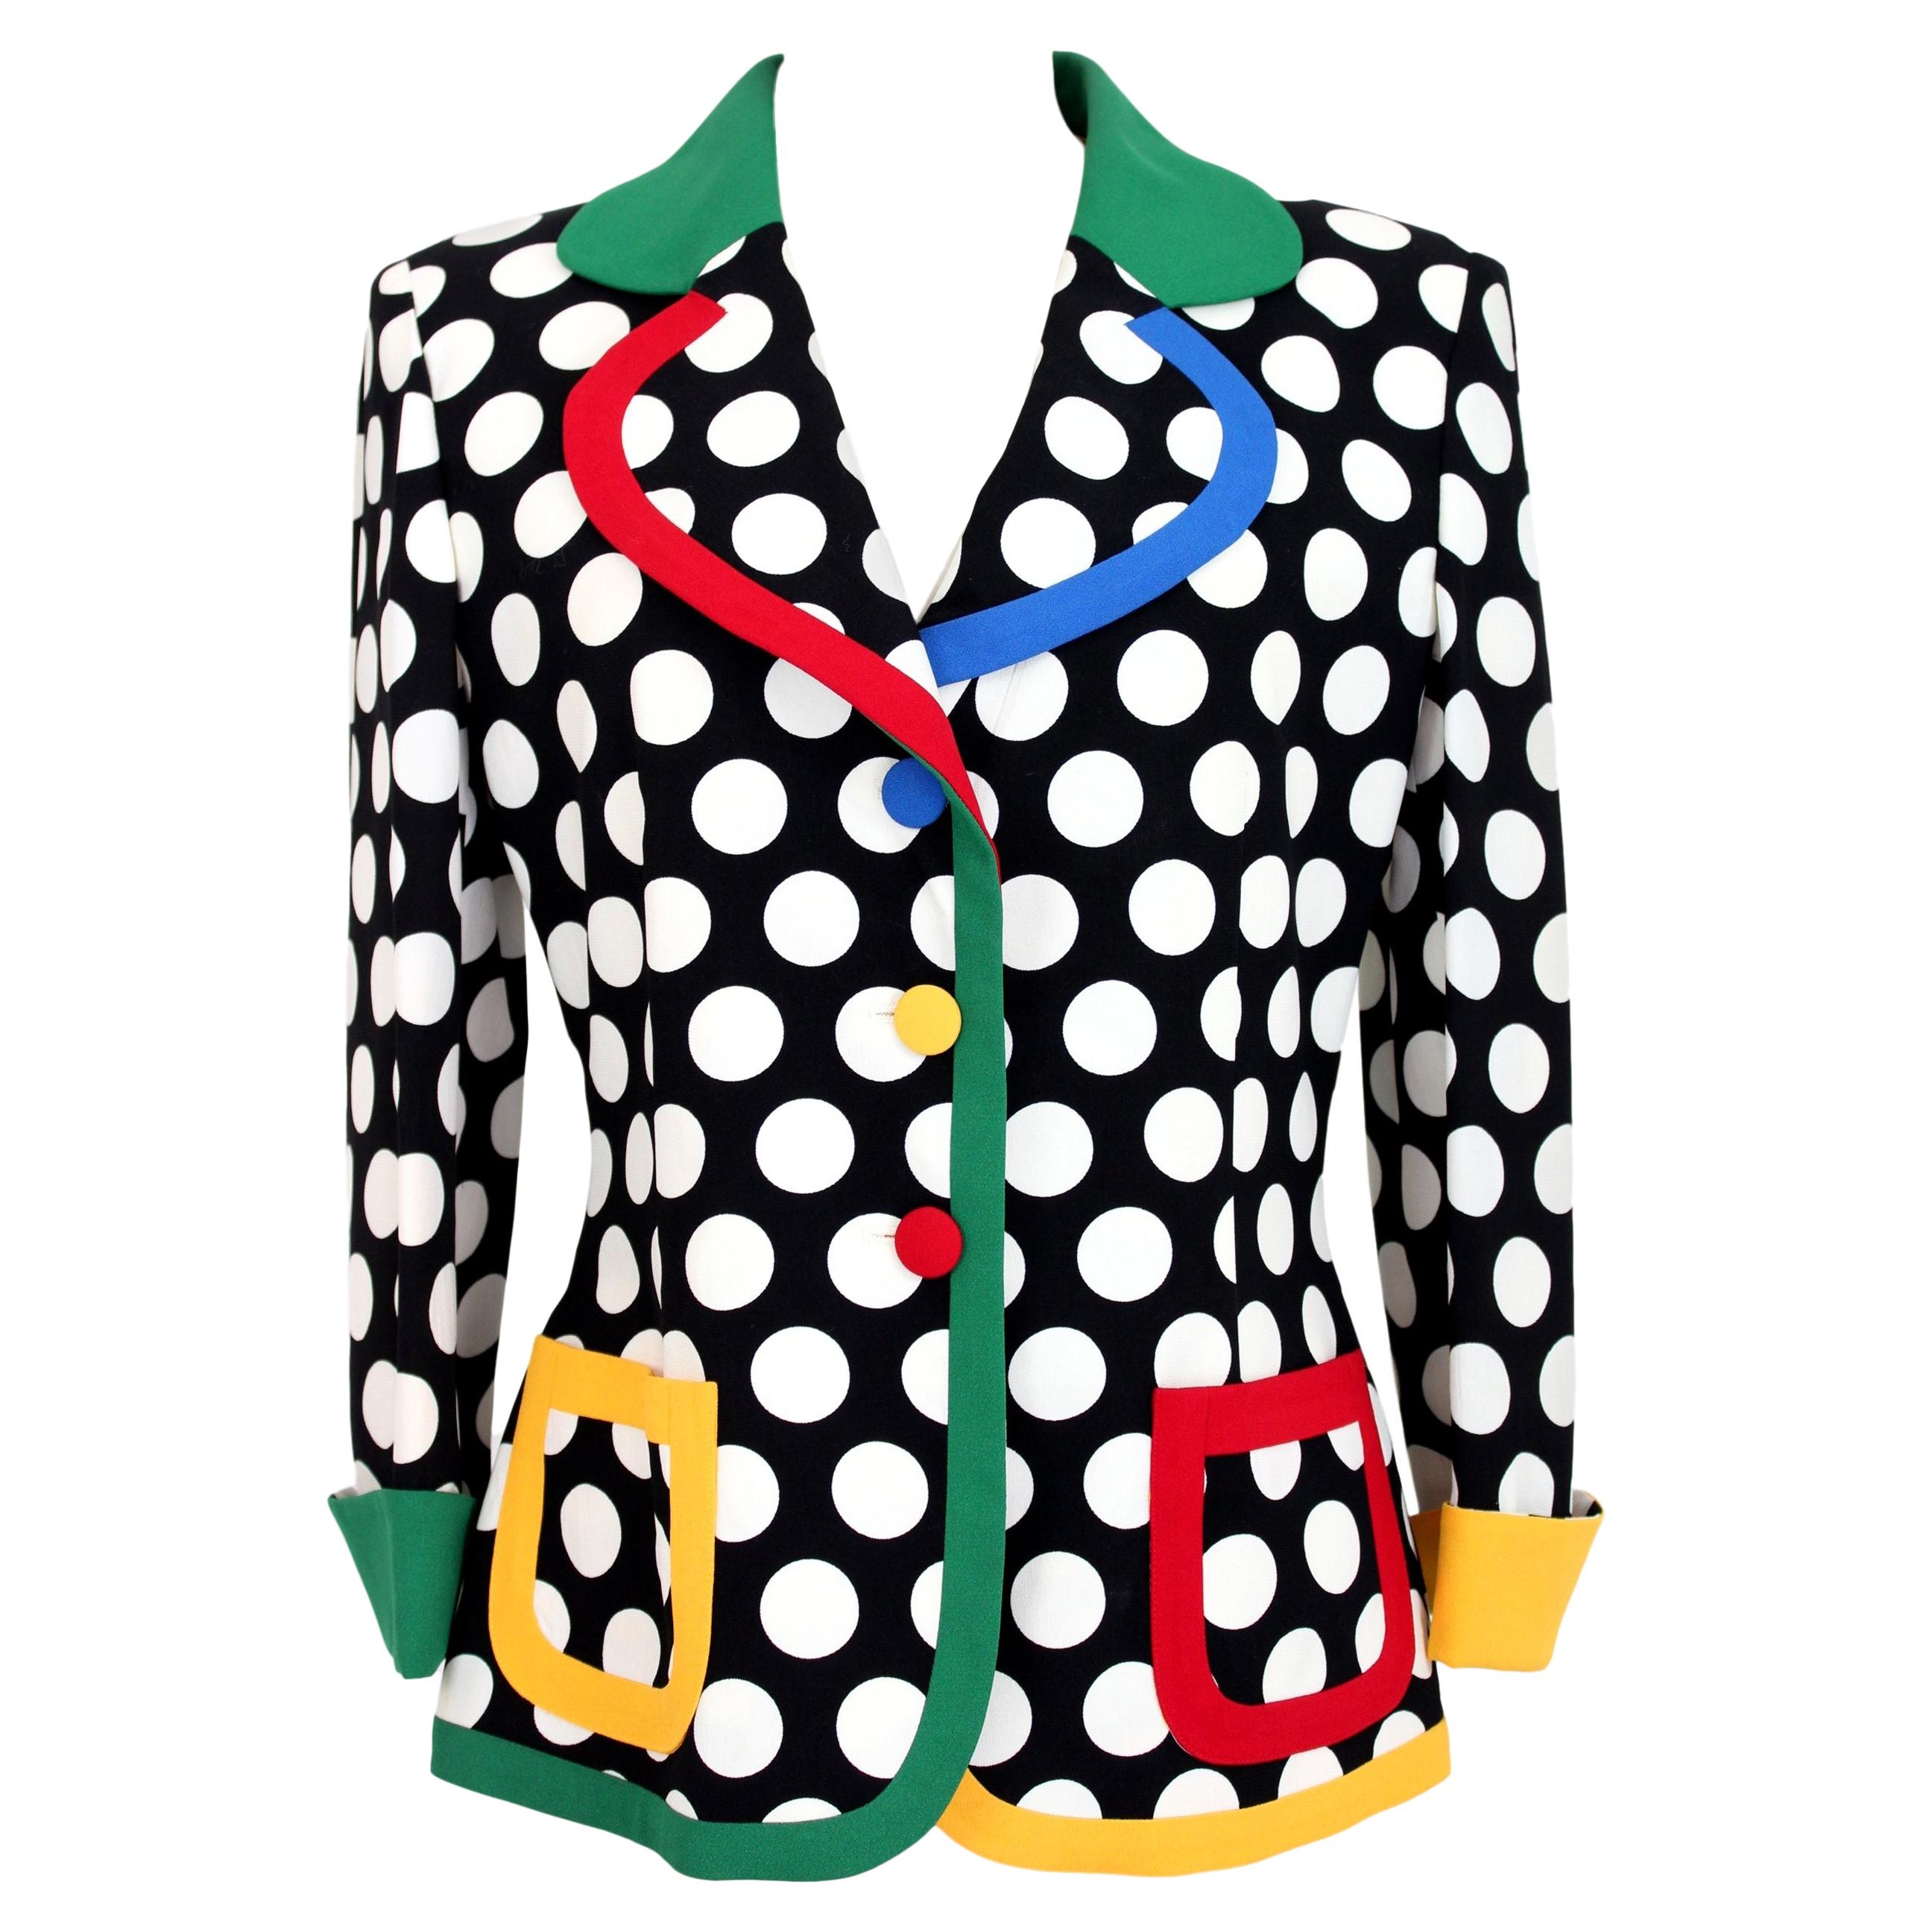 Moschino Cheap and Chic 90s vintage women's jacket. Blazer with black and white polka dots, colored profiles. Internally lined. 100% rayon. Made in Italy. Excellent vintage condition.

Size: 44 It 10 Us 12 Uk

Shoulder: 44 cm
Bust / Chest: 47